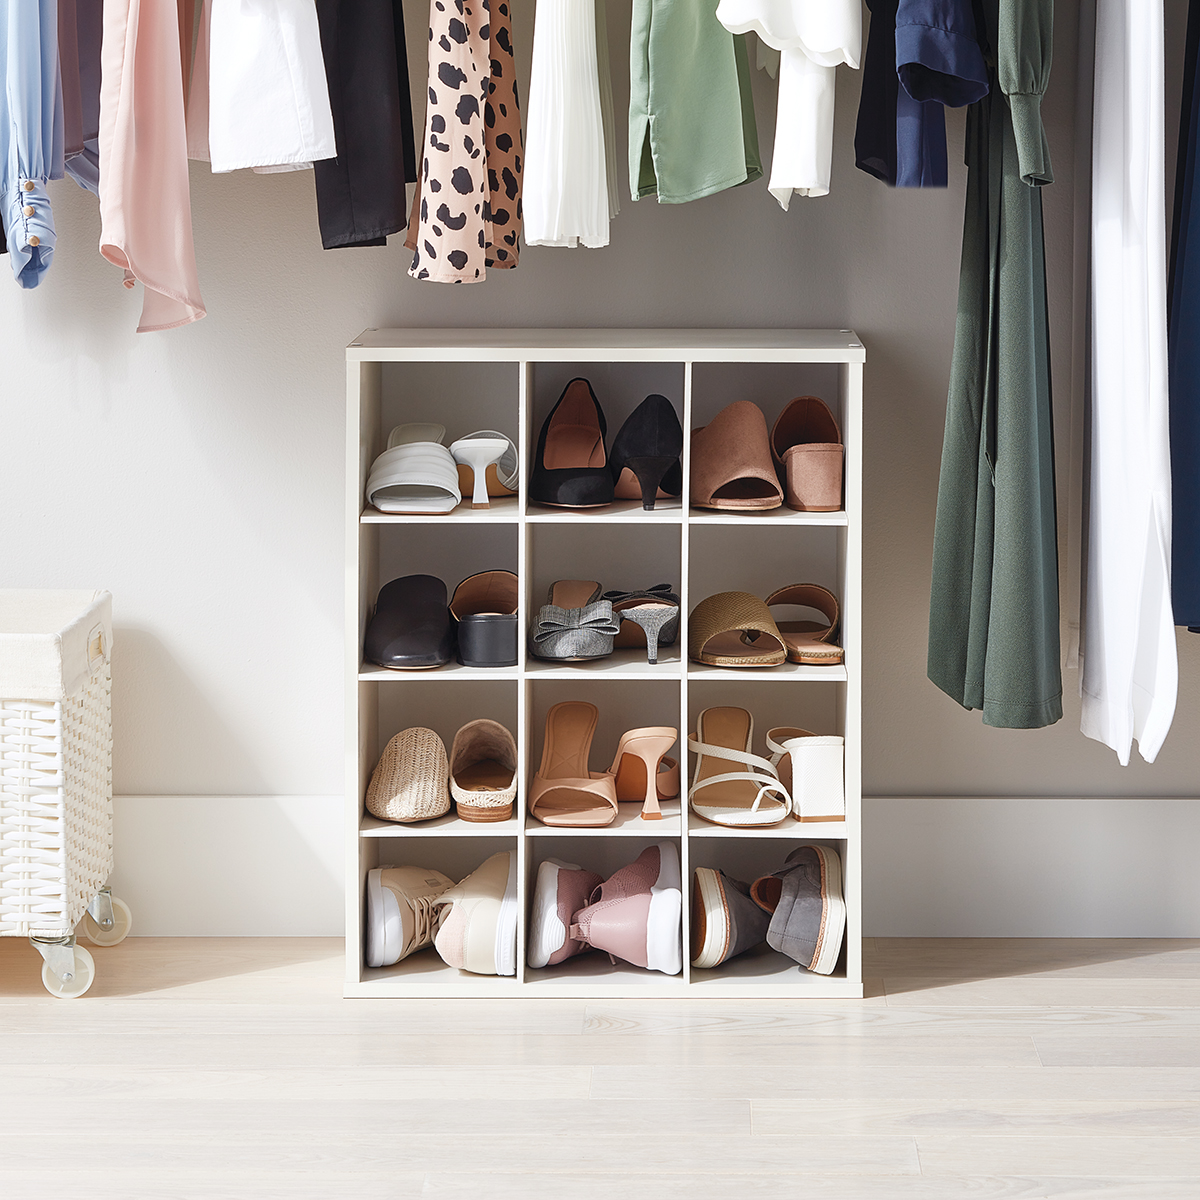 The Container Store 12-Pair Shoe Organizer | The Container Store